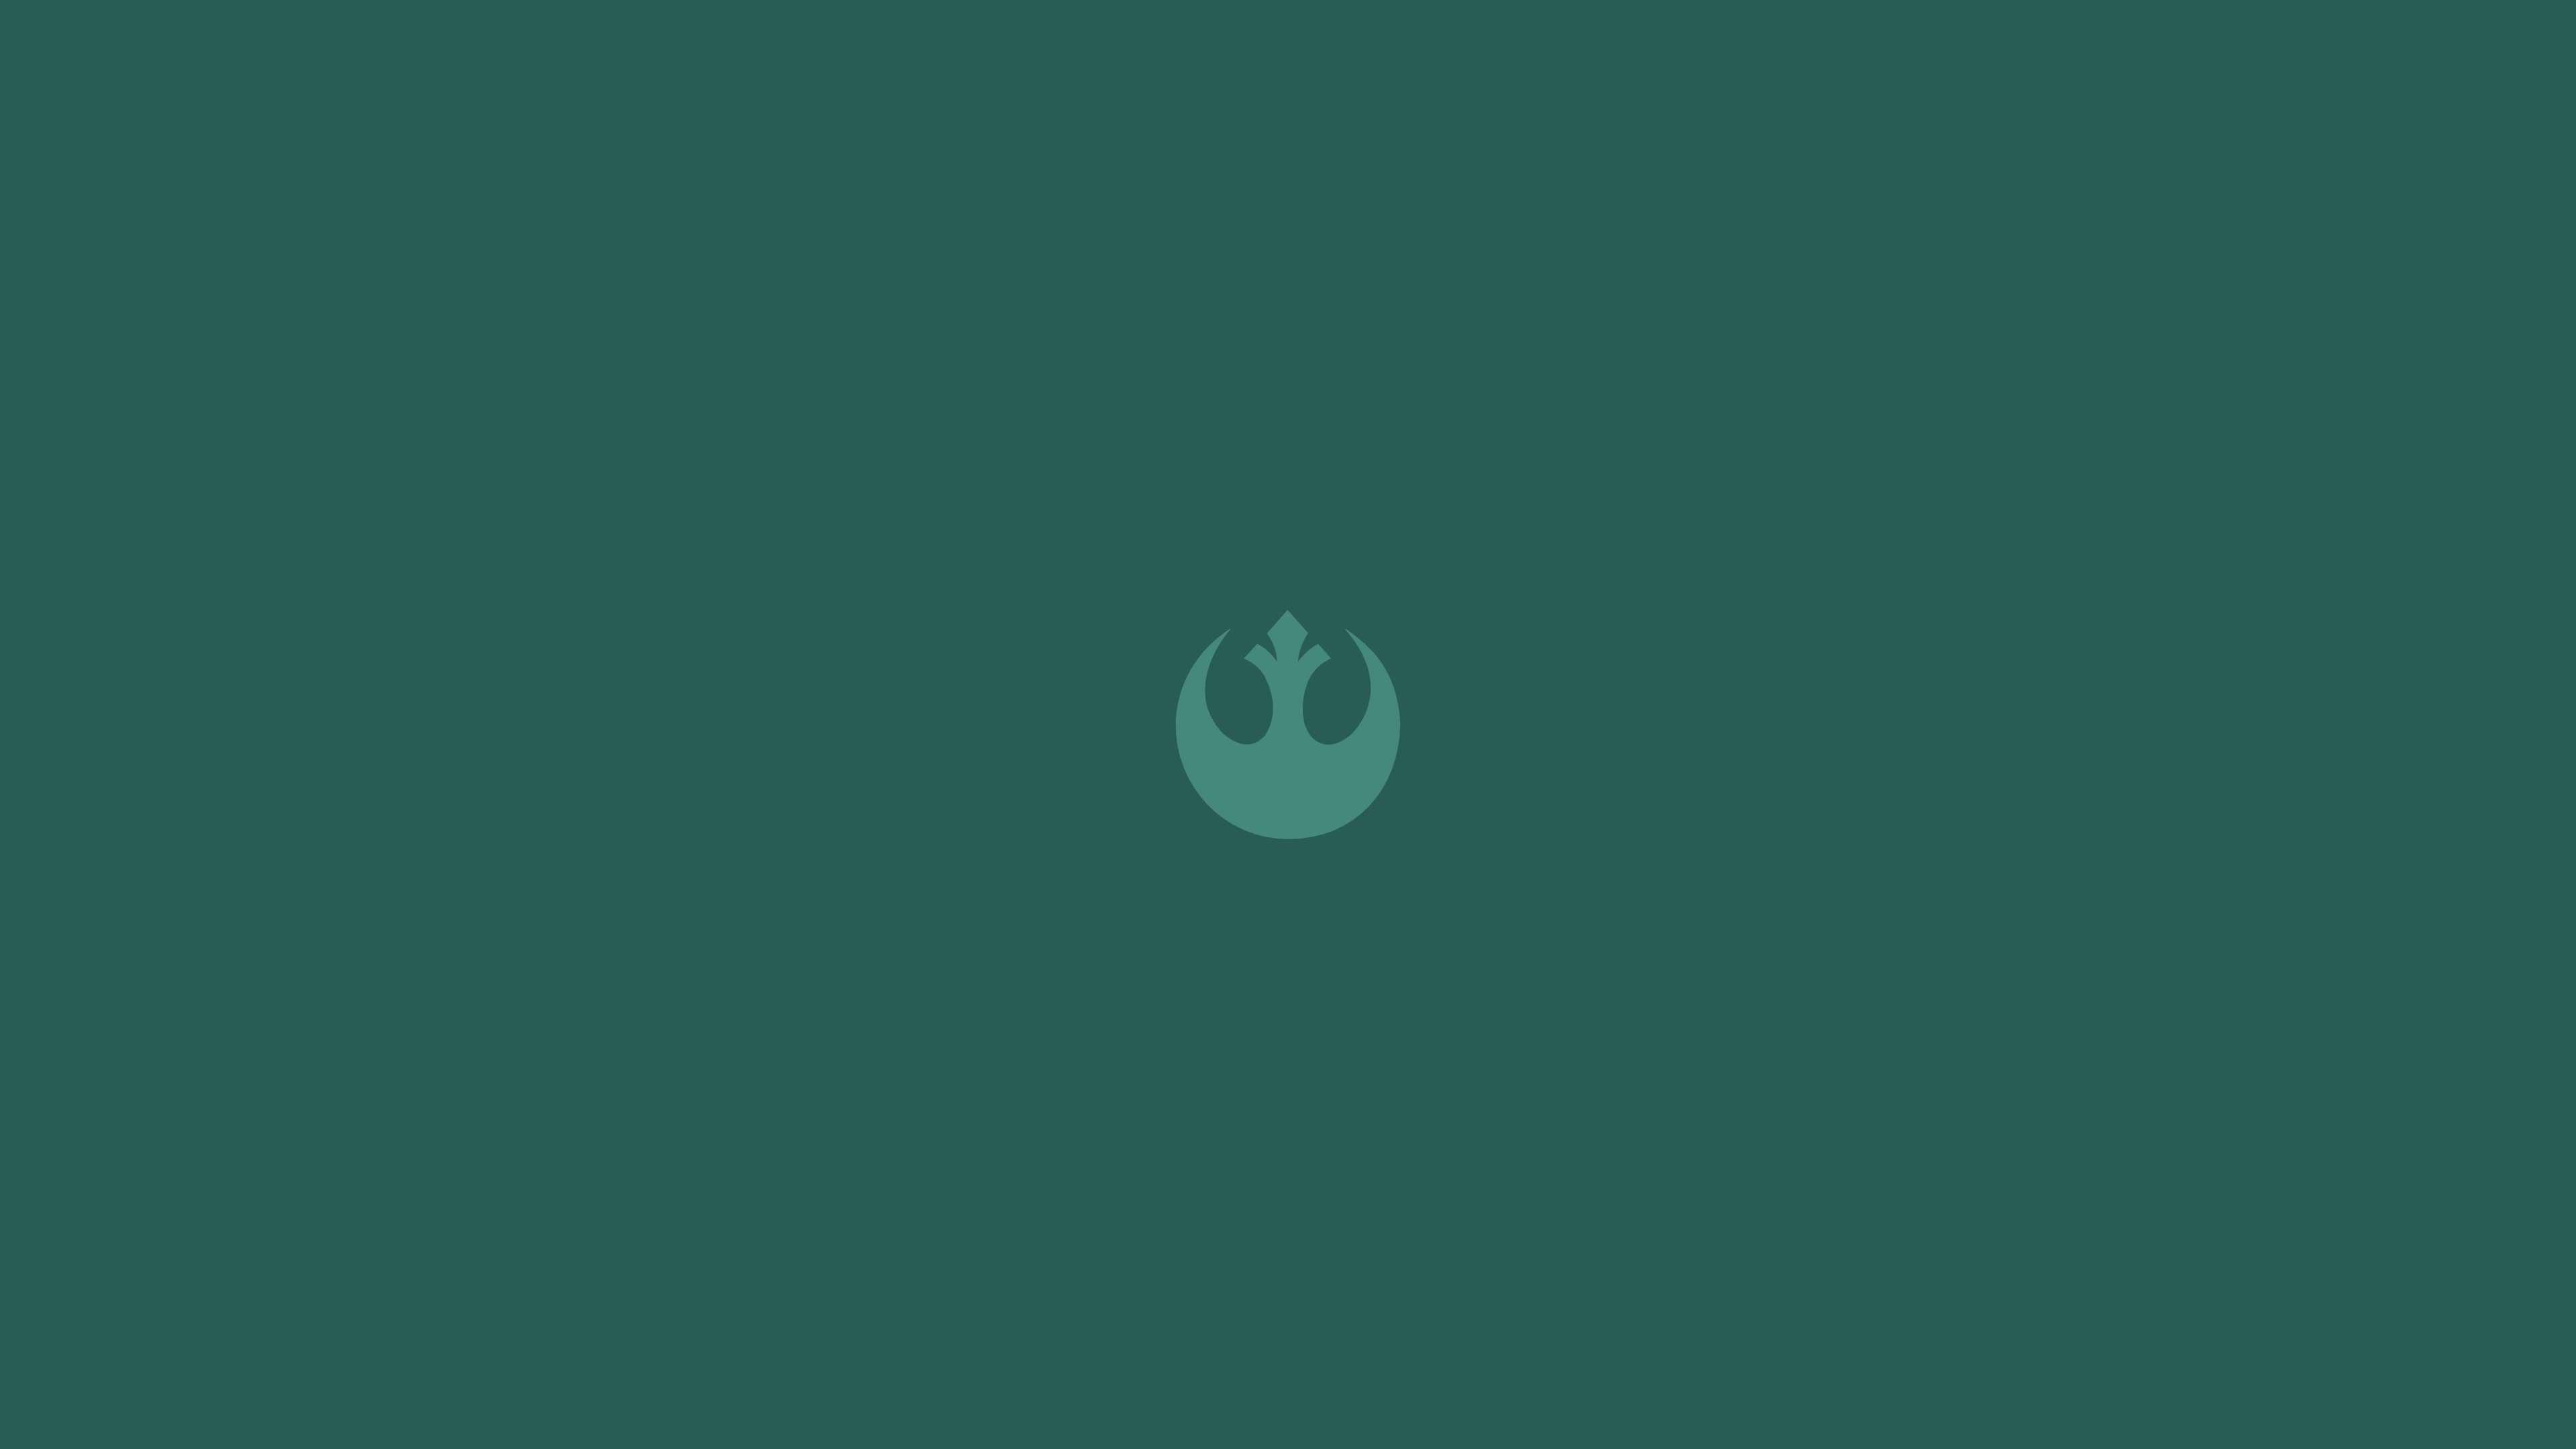 The star wars logo on a green background - Star Wars